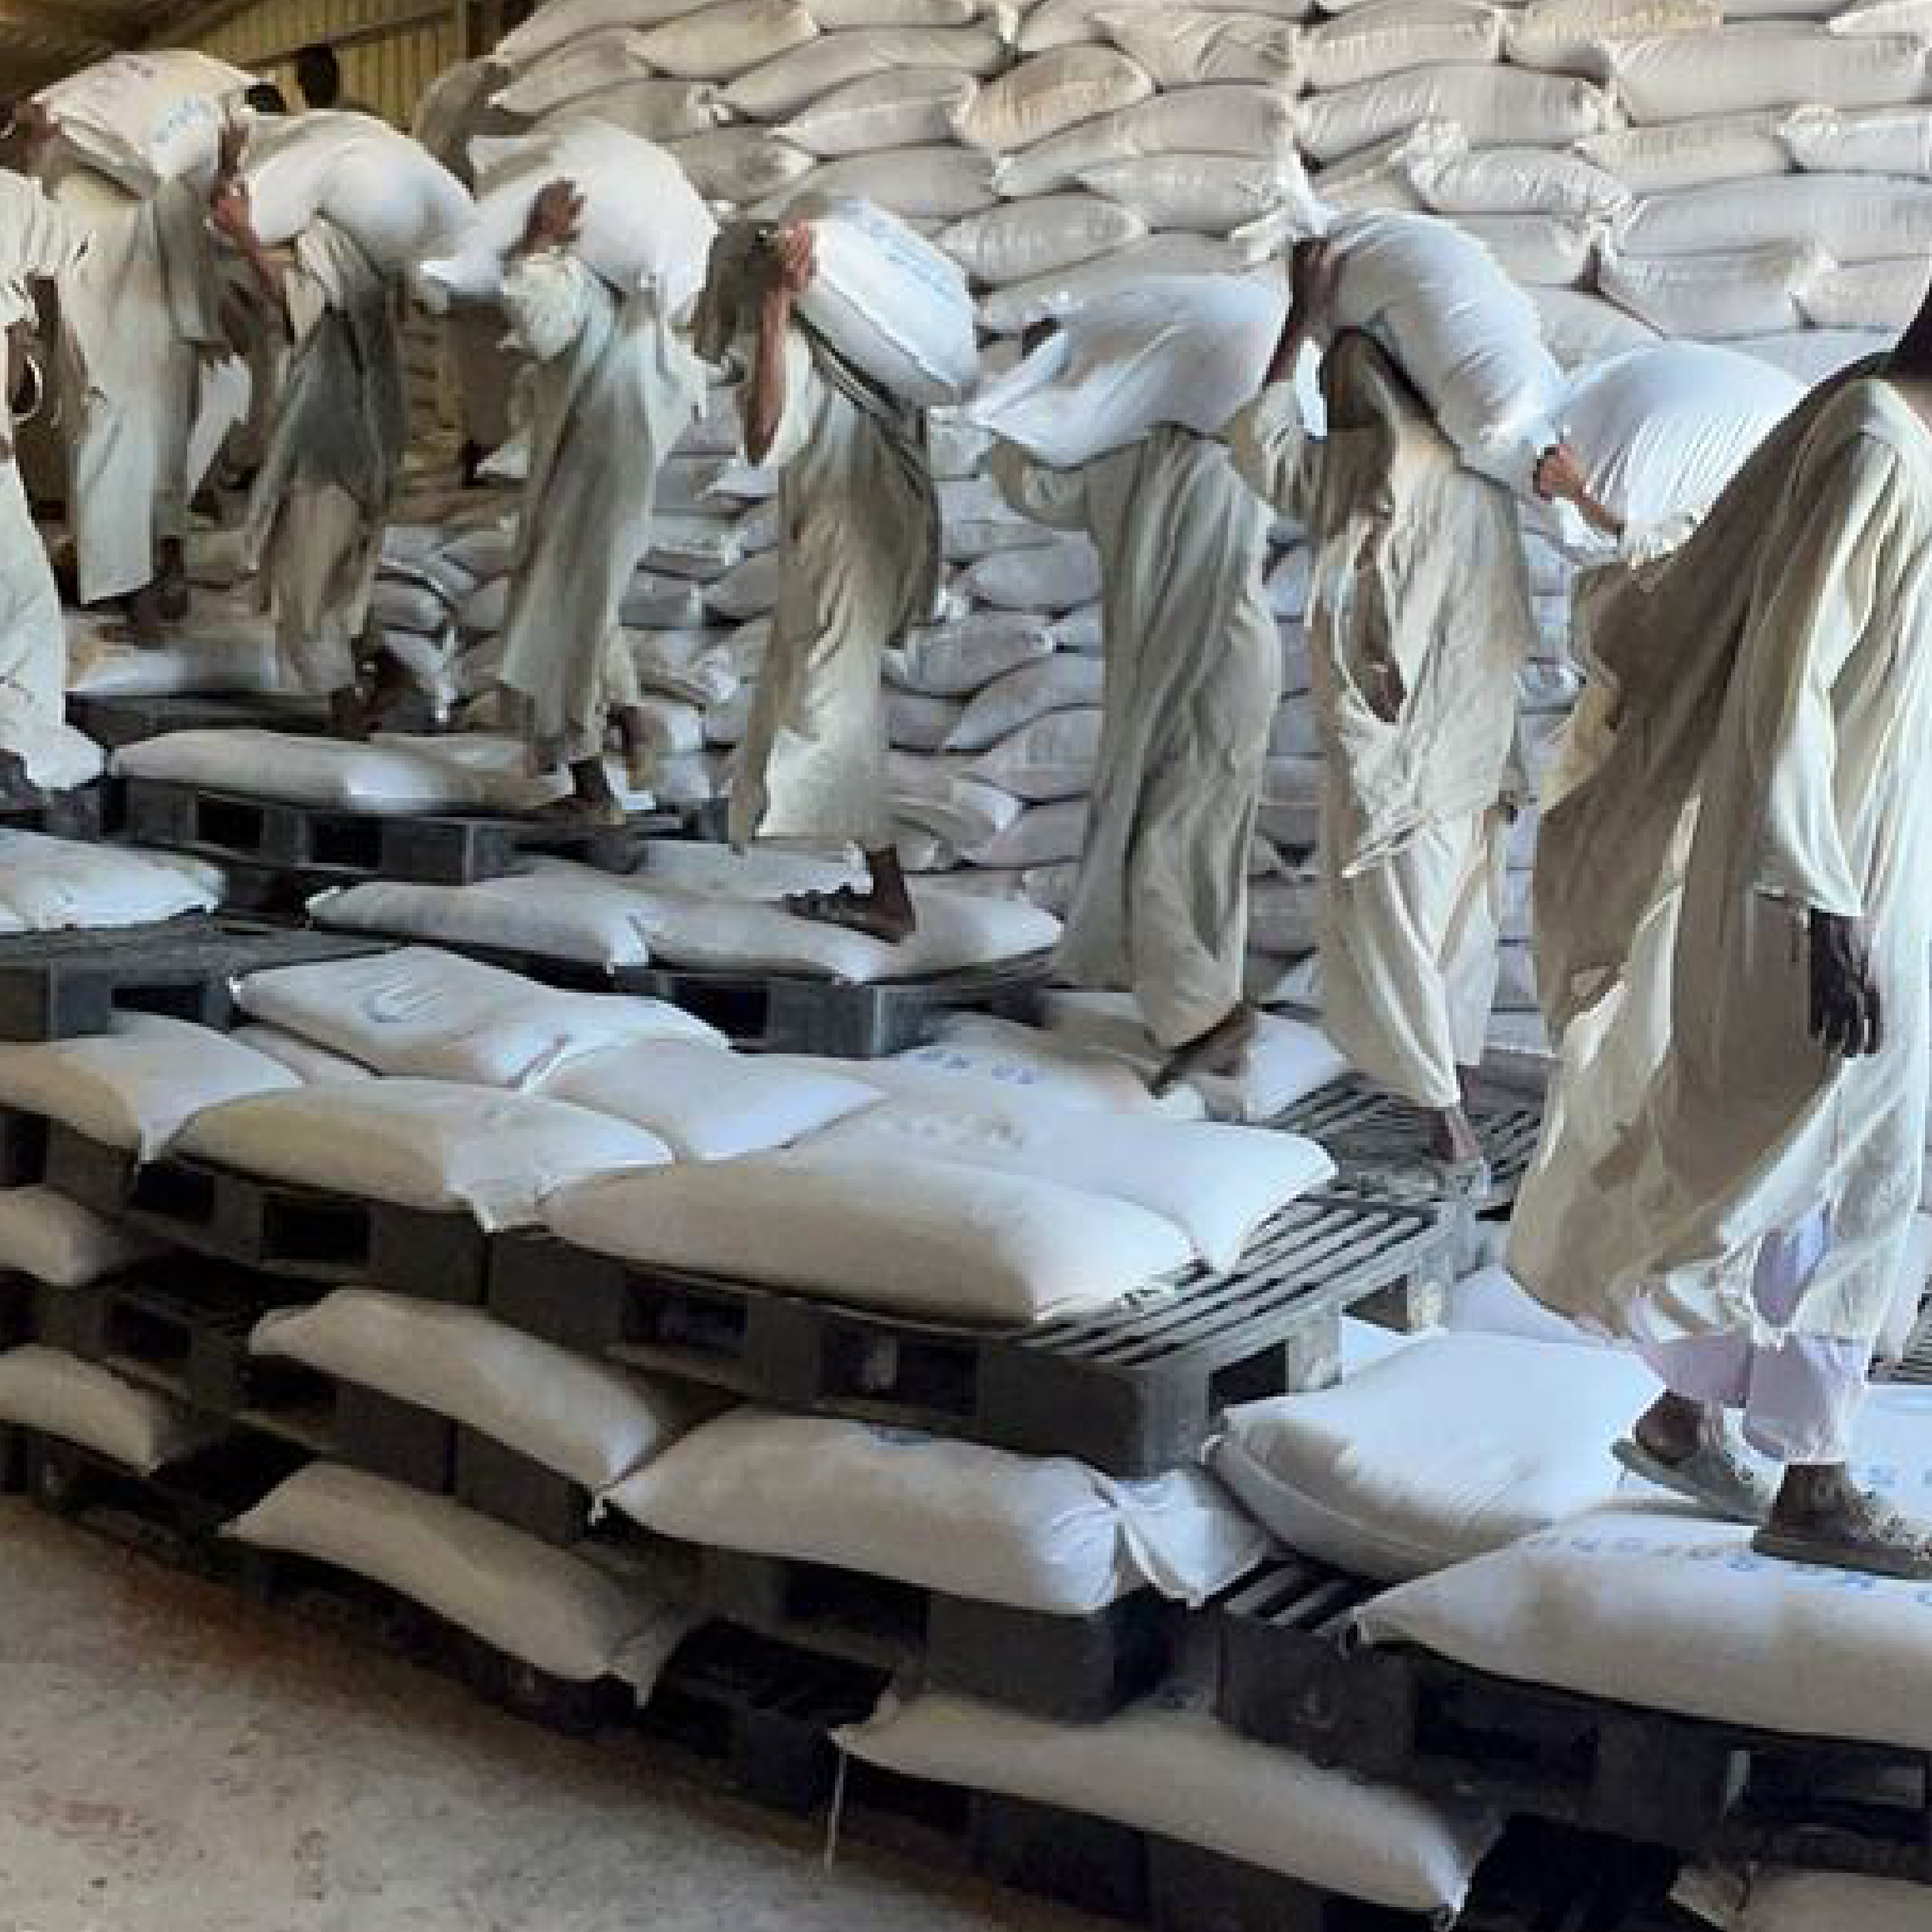 WFP warehouses in Port Sudan are being stocked with food commodities for emergency distribution.